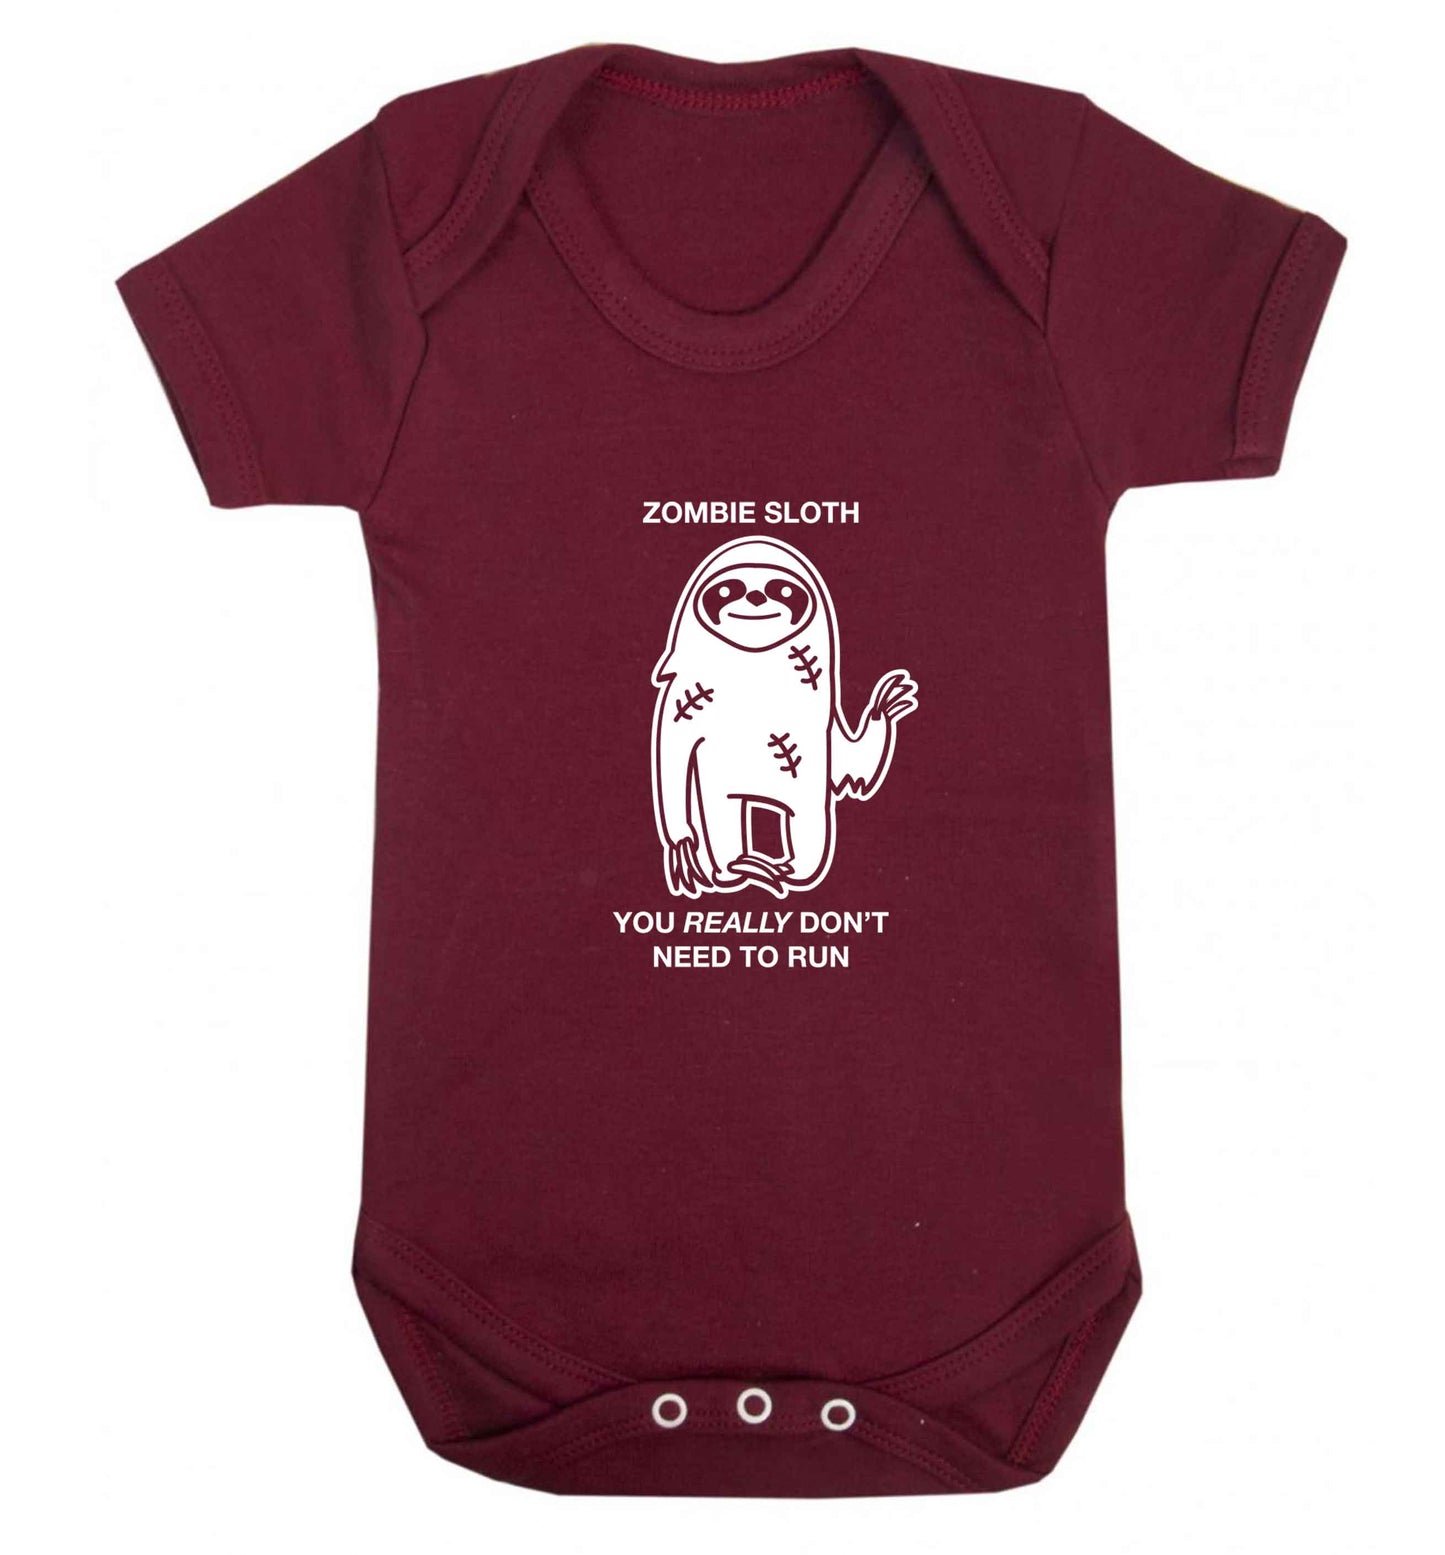 Zombie sloth you really don't need to run baby vest maroon 18-24 months